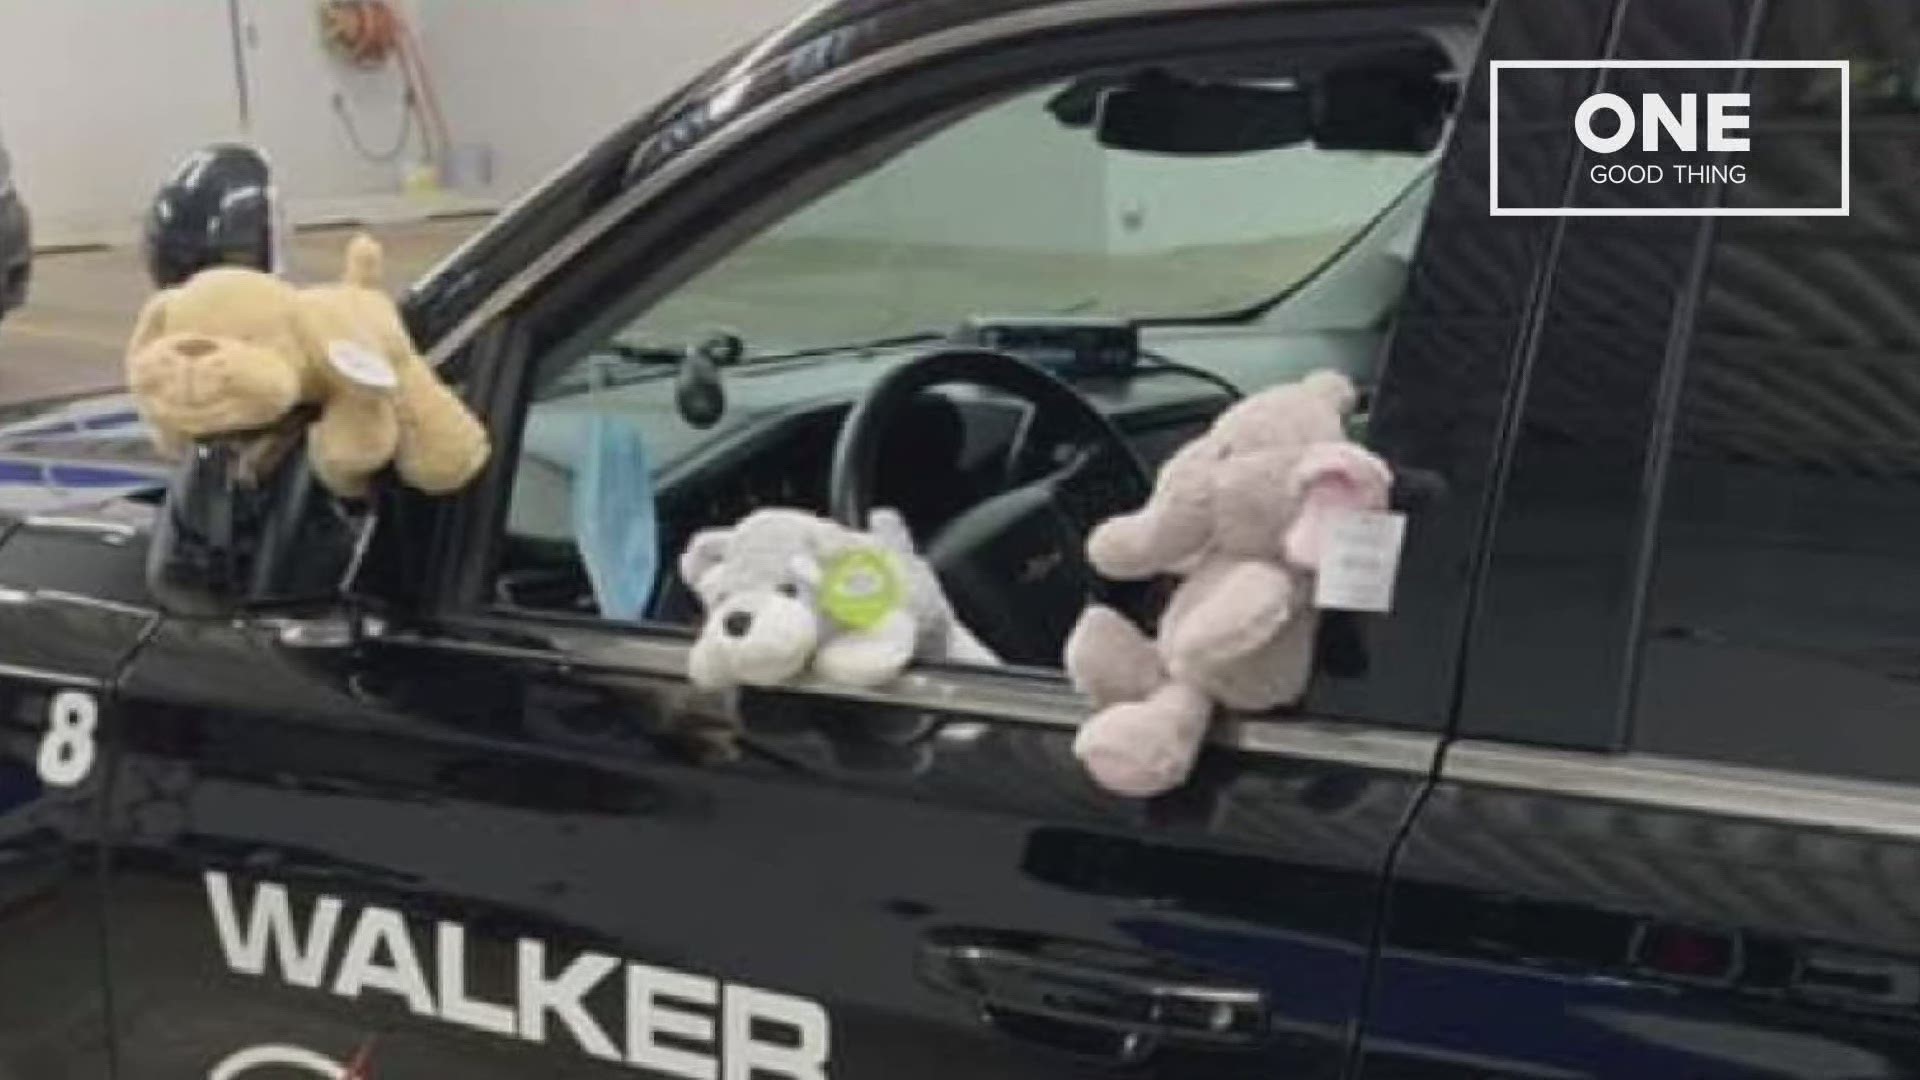 Grand Rapids Police recently were given a carload of stuffed animals that can be used whenever a child is involved in a traumatic situation.